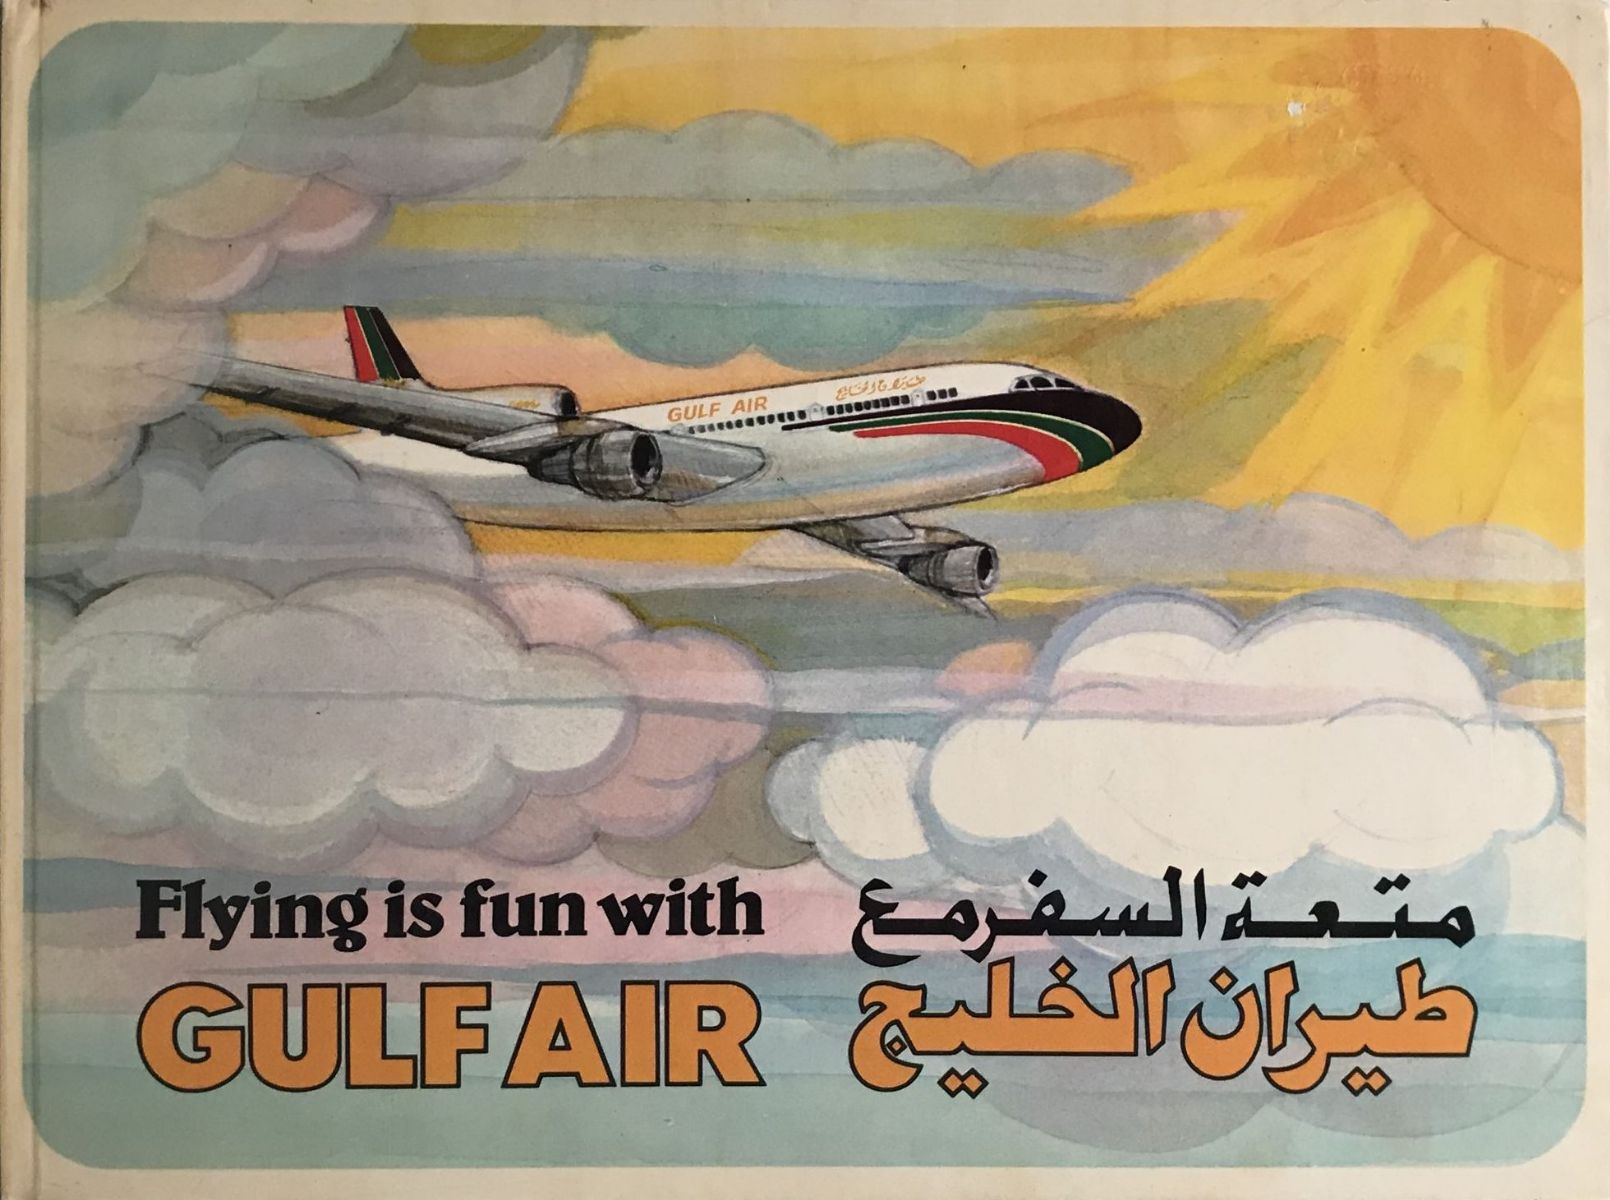 FLYING IS FUN WITH GULF AIR